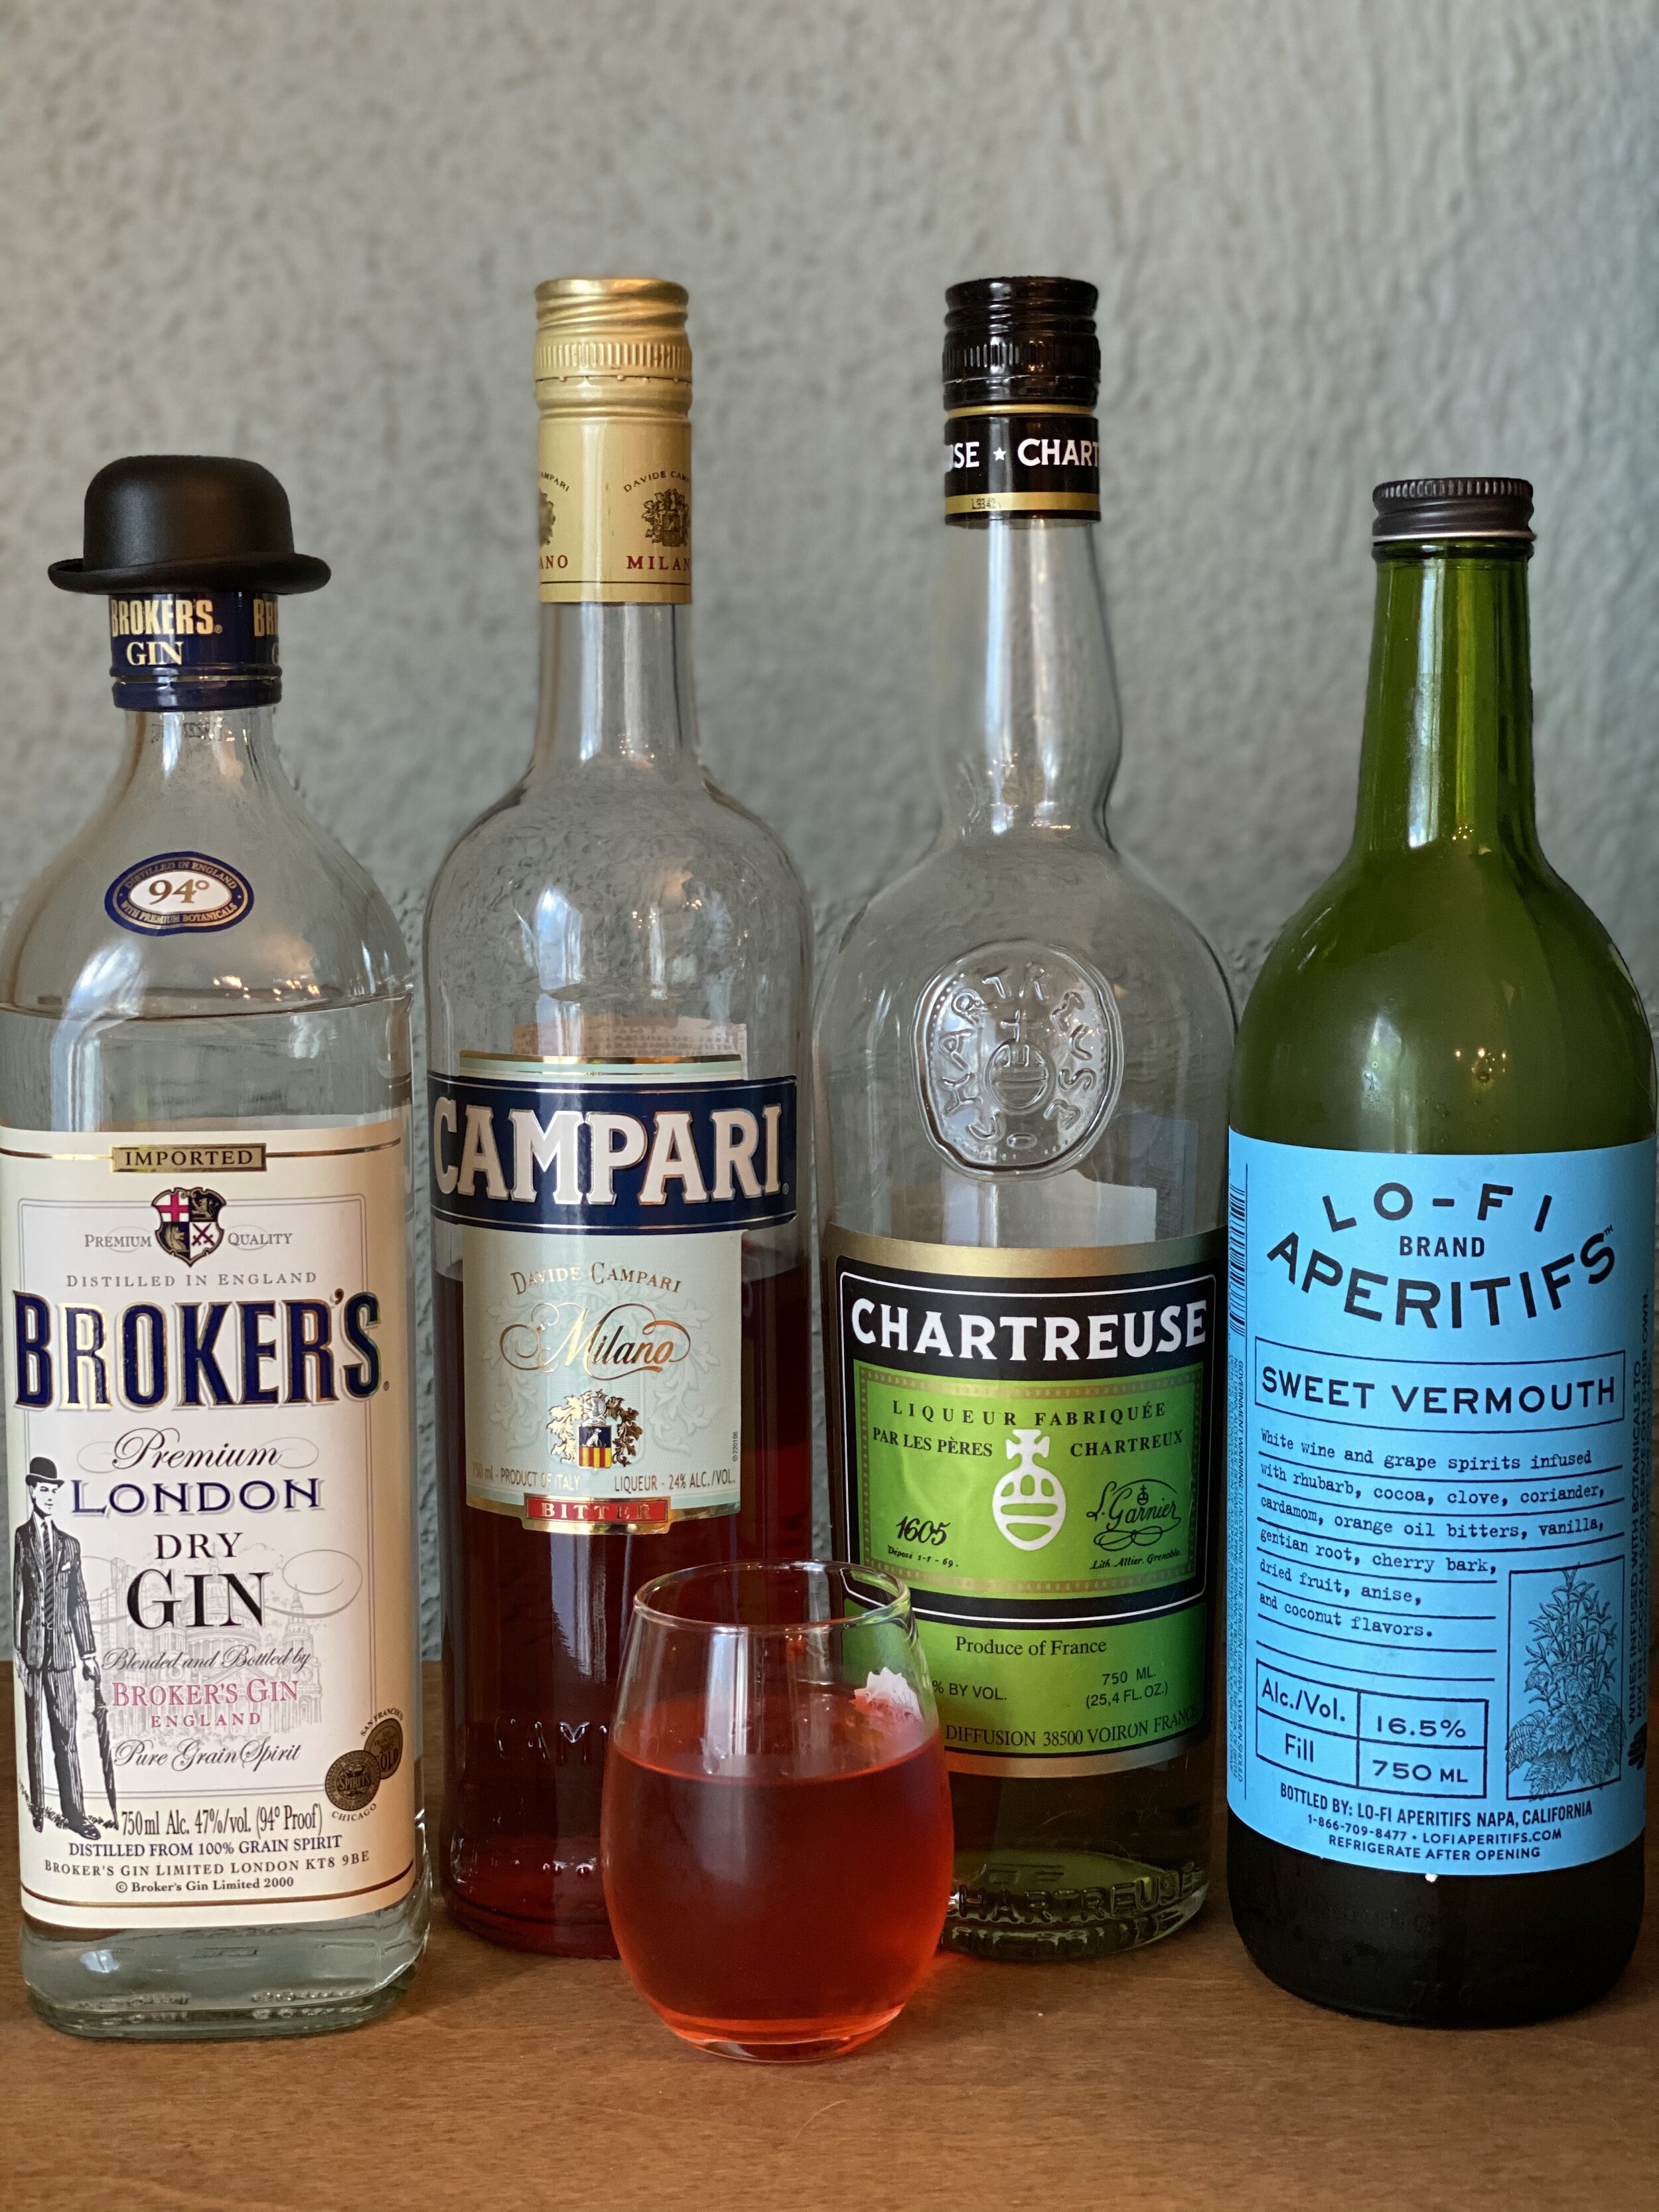 The Oliver - Imagined for Gin or Whiskey: The Unclassic Negroni with  Wormwood Extractsts